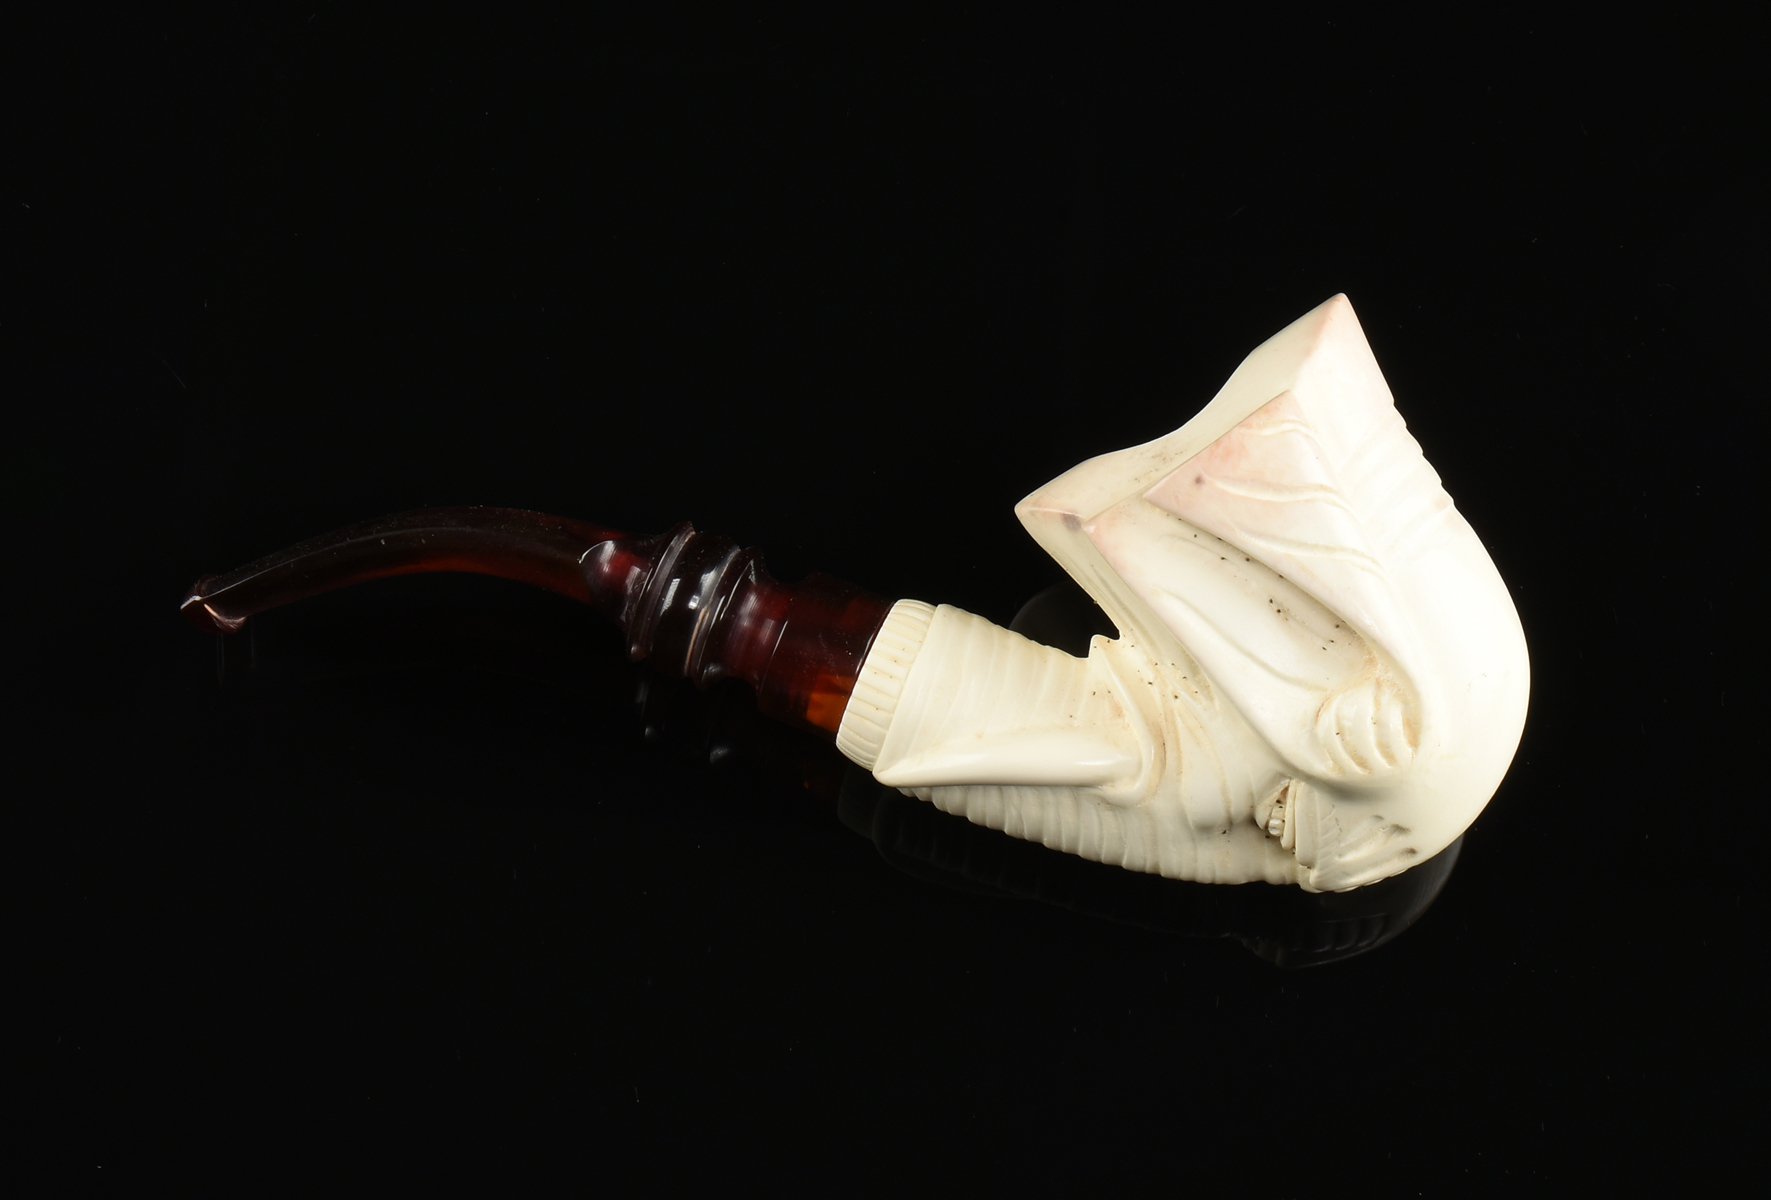 A GROUP OF THREE MEERSCHAUM TOBACCO PIPES, LATE 19TH/EARLY 20TH CENTURY, carved in the form of a - Image 5 of 9